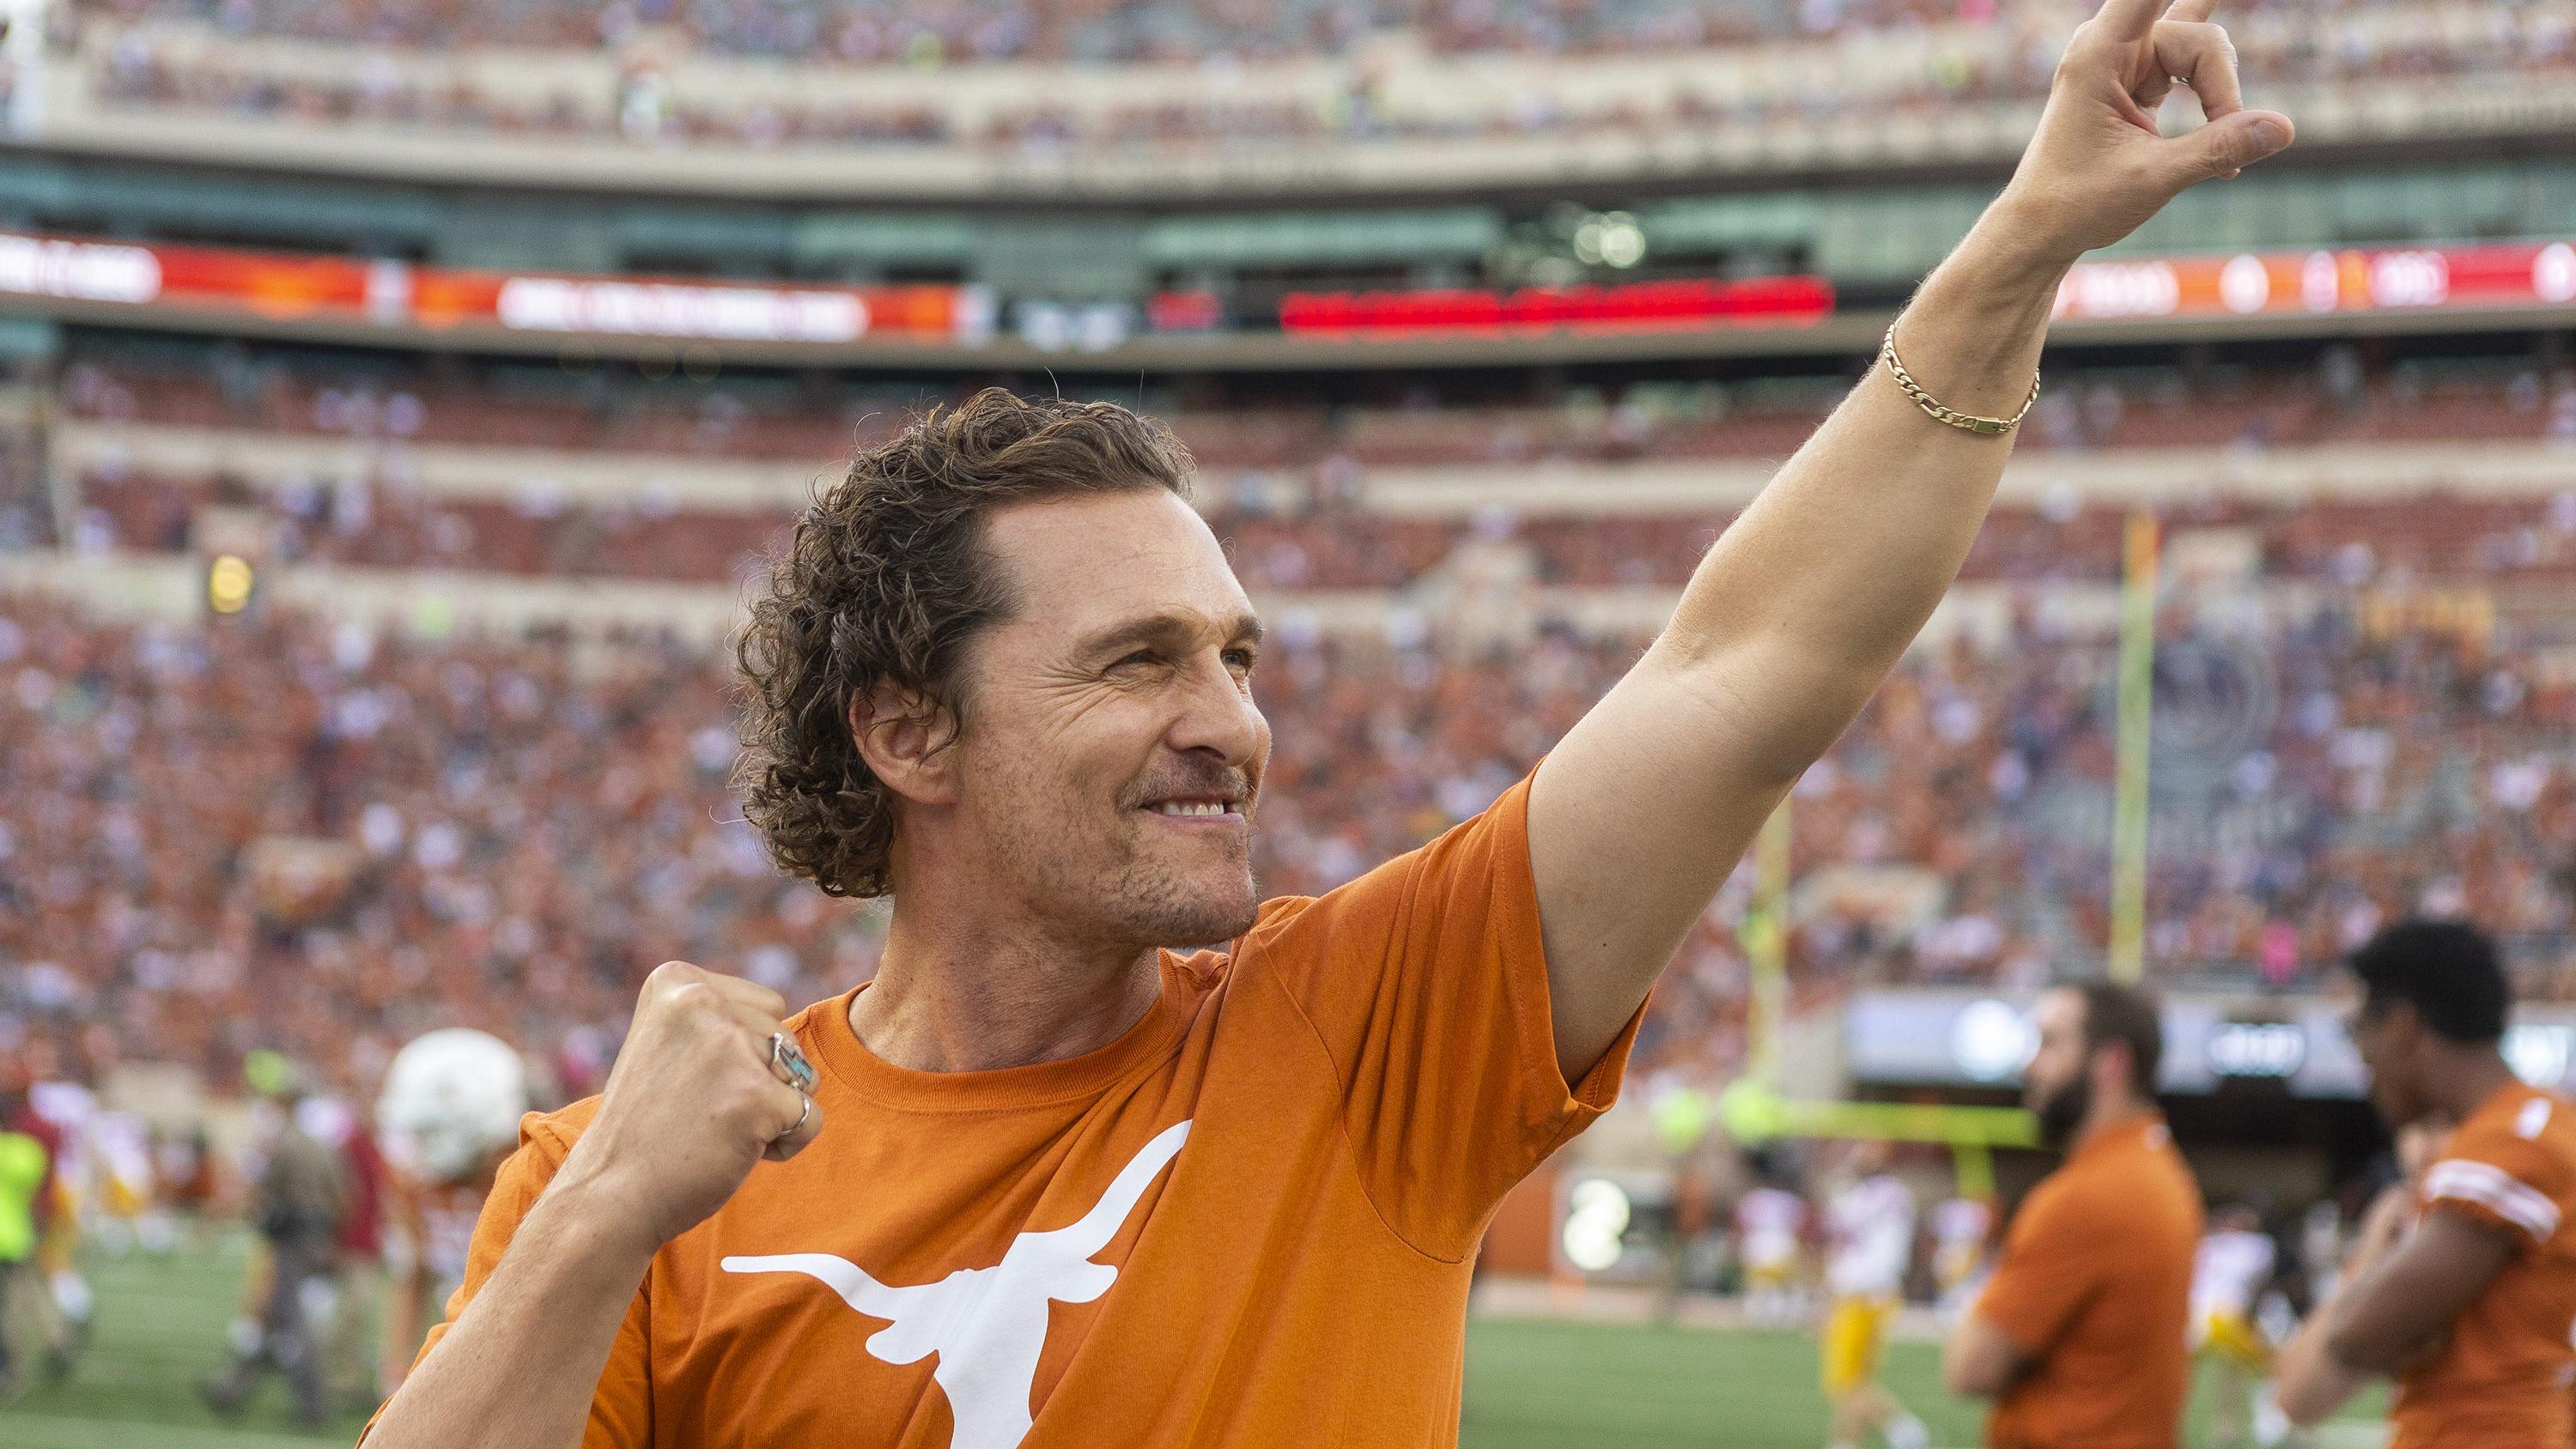 Matthew McConaughey gives the Hook 'Em Horns sign to the crowd before an NCAA football game at Royal-Memorial Stadium, Saturday, Sept. 15, 2018. [Stephen Spillman for Statesman)